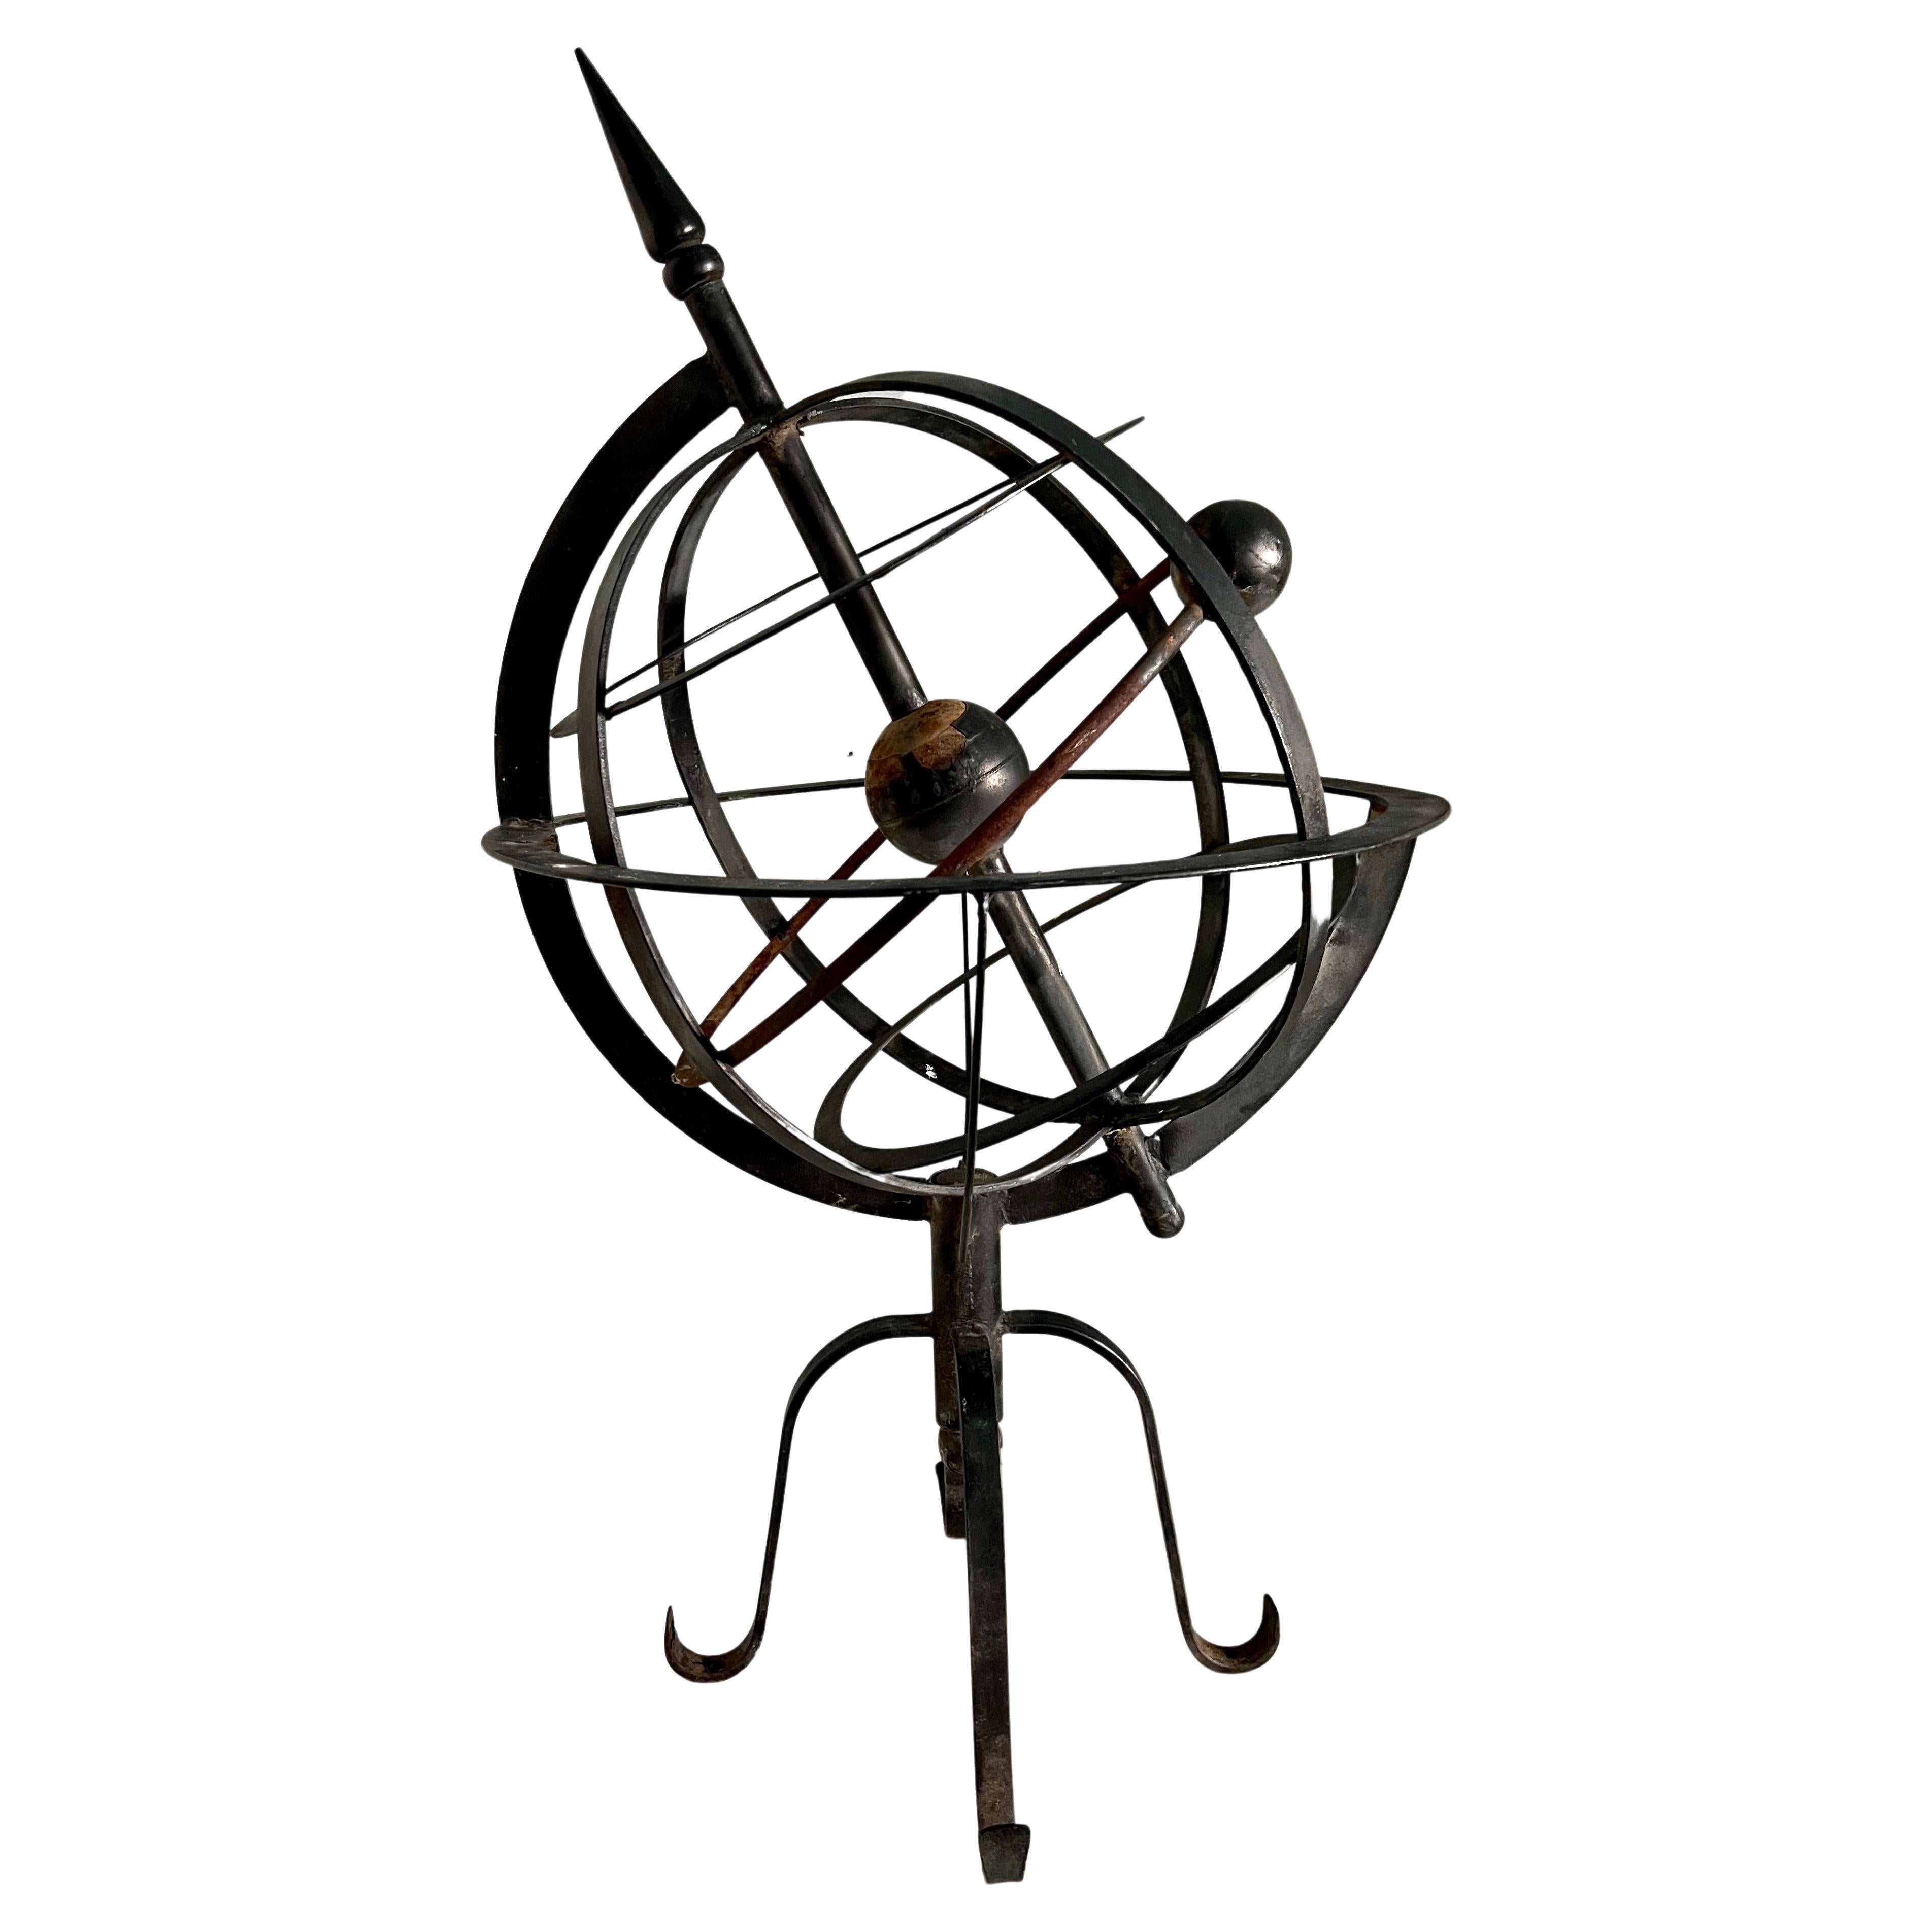 An Armillary is a measurement of the heavens that dates back to the 14th Century. In modern homes, beause they are usually made of wrought iron, they work very nicely in the garden as an architectural element or even in the home as a point of